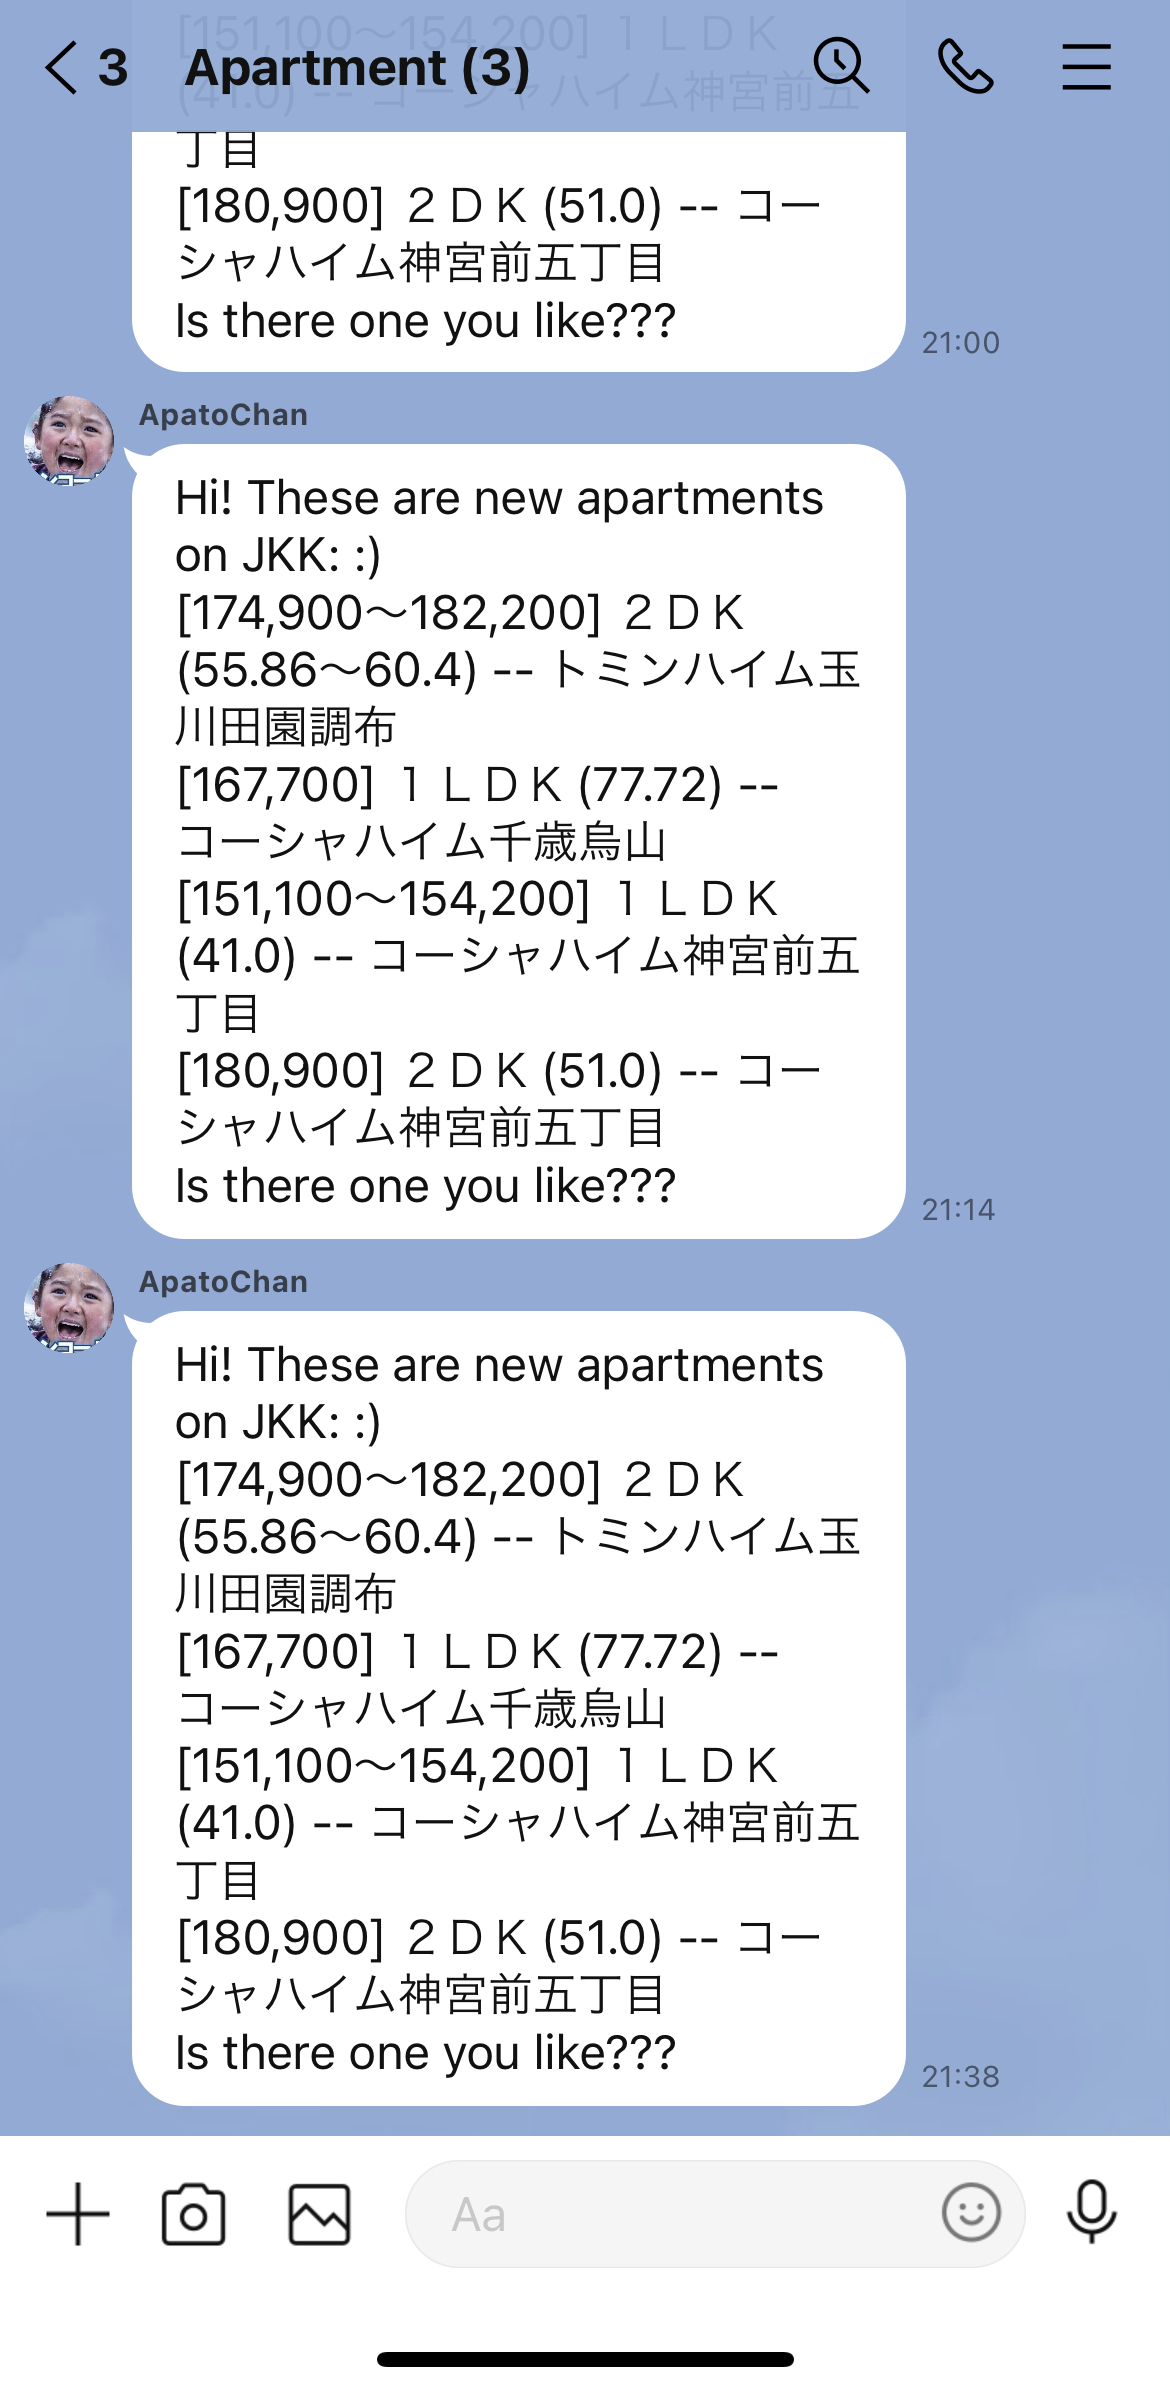 Apartment bot in action